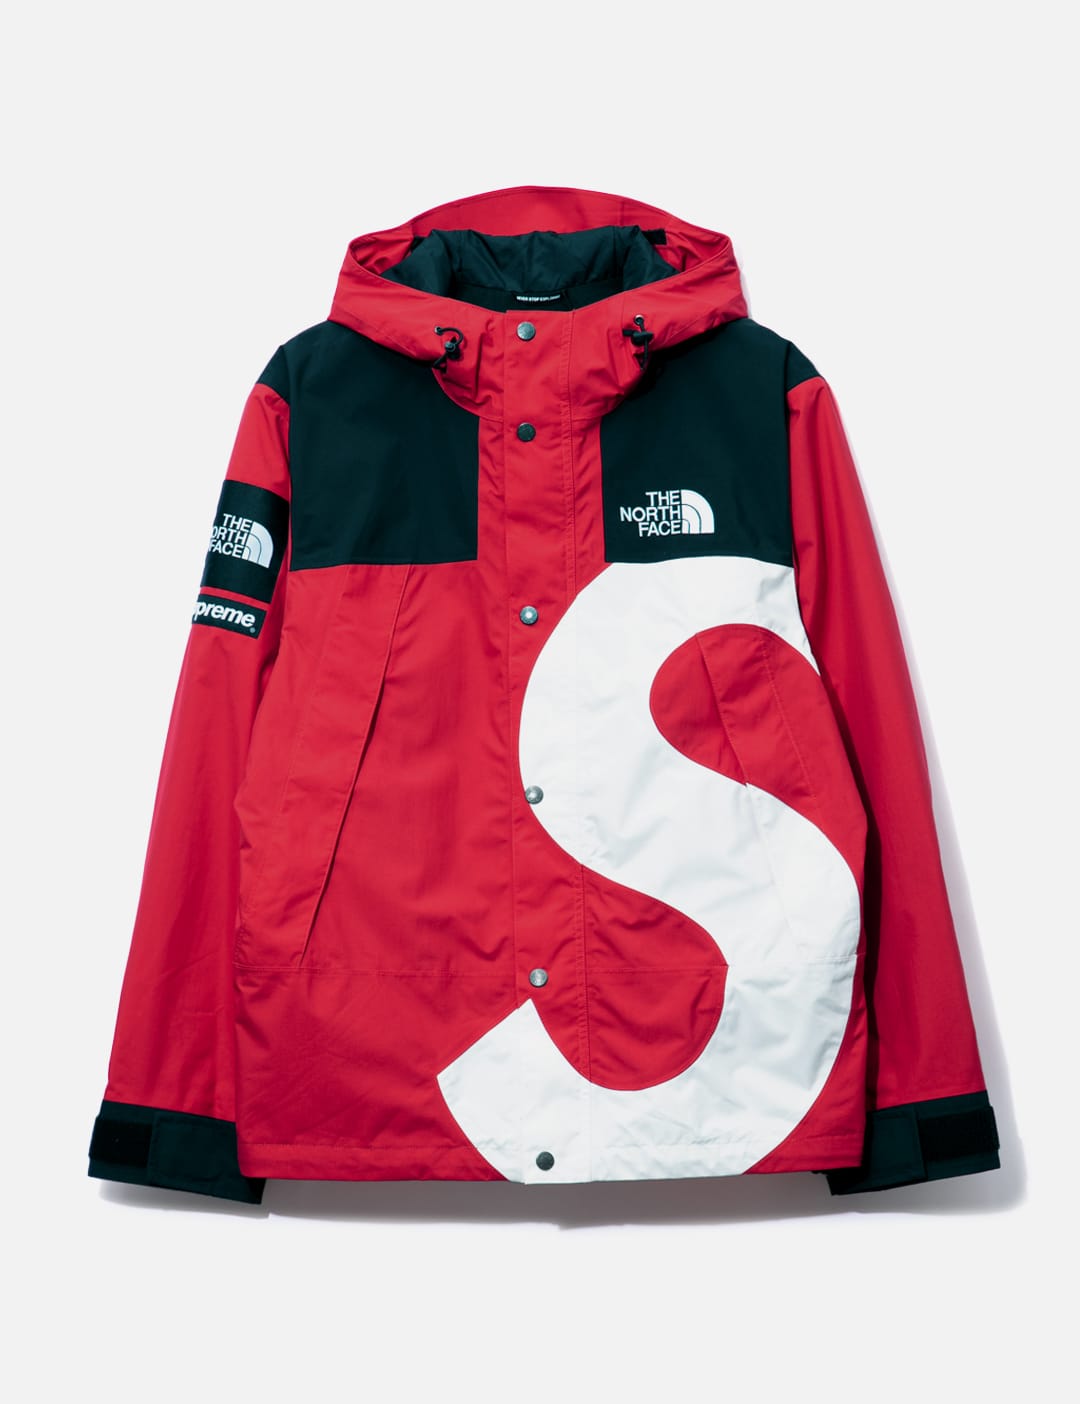 Supreme - Supreme x The North Face FW20 Mountain Jacket | HBX - Globally  Curated Fashion and Lifestyle by Hypebeast